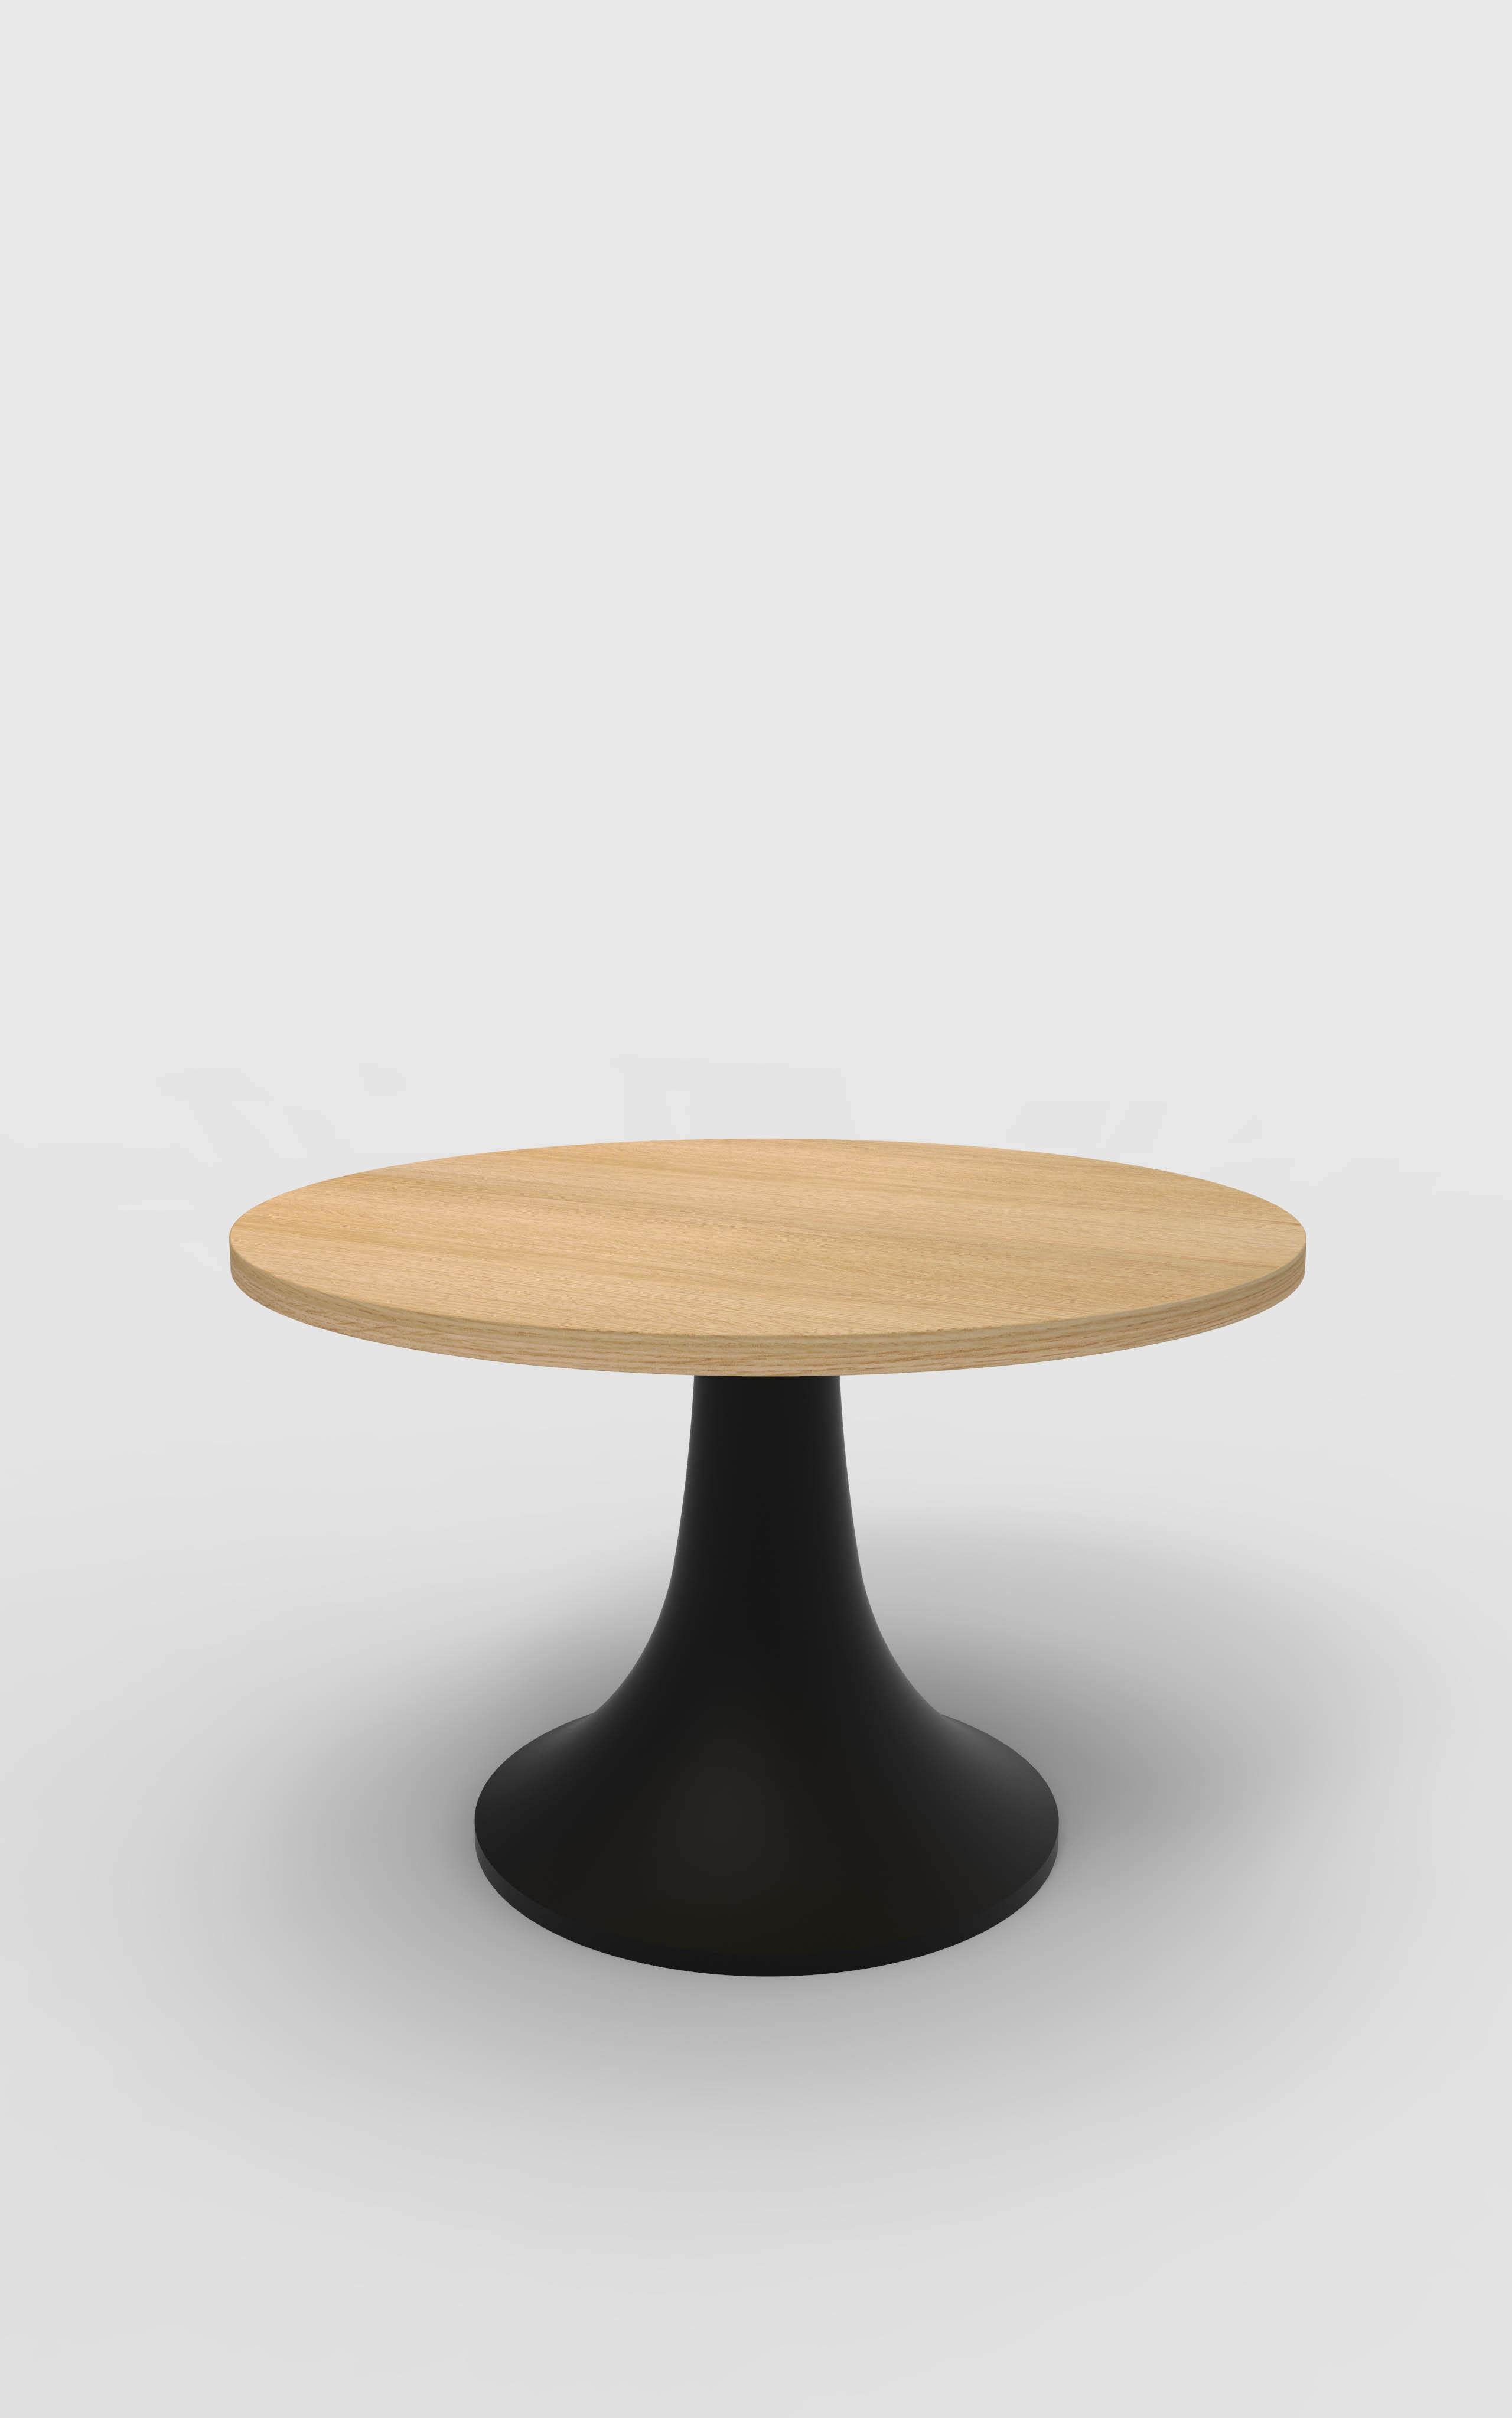 Orphan work 200 Dining Table
Shown in oak with black.
Available in natural oak with painted base.
Measures: 48